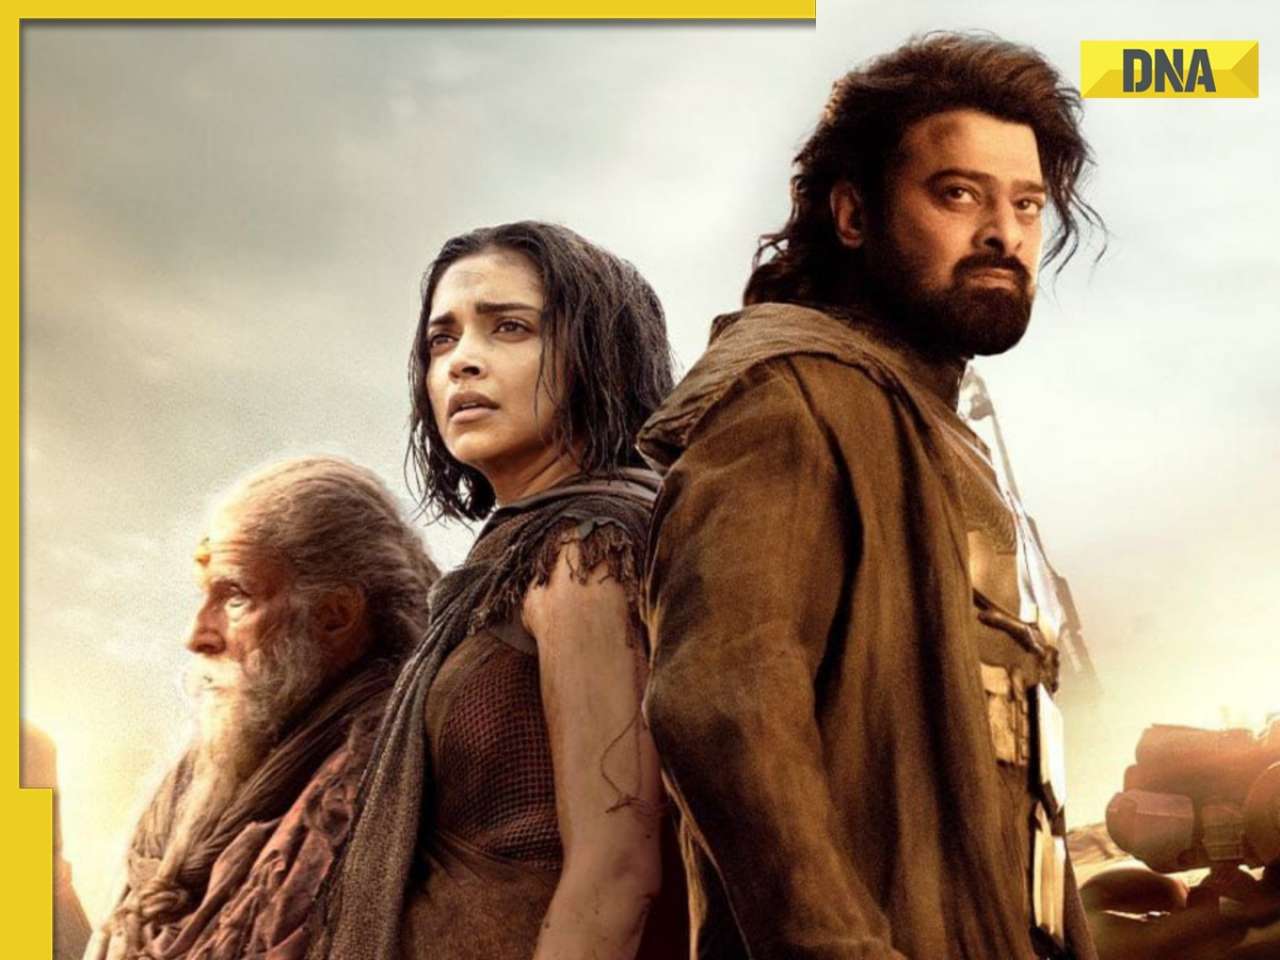 Kalki 2898 AD release, review highlights: Trade experts predict Prabhas-starrer to cross Rs 1000 crore